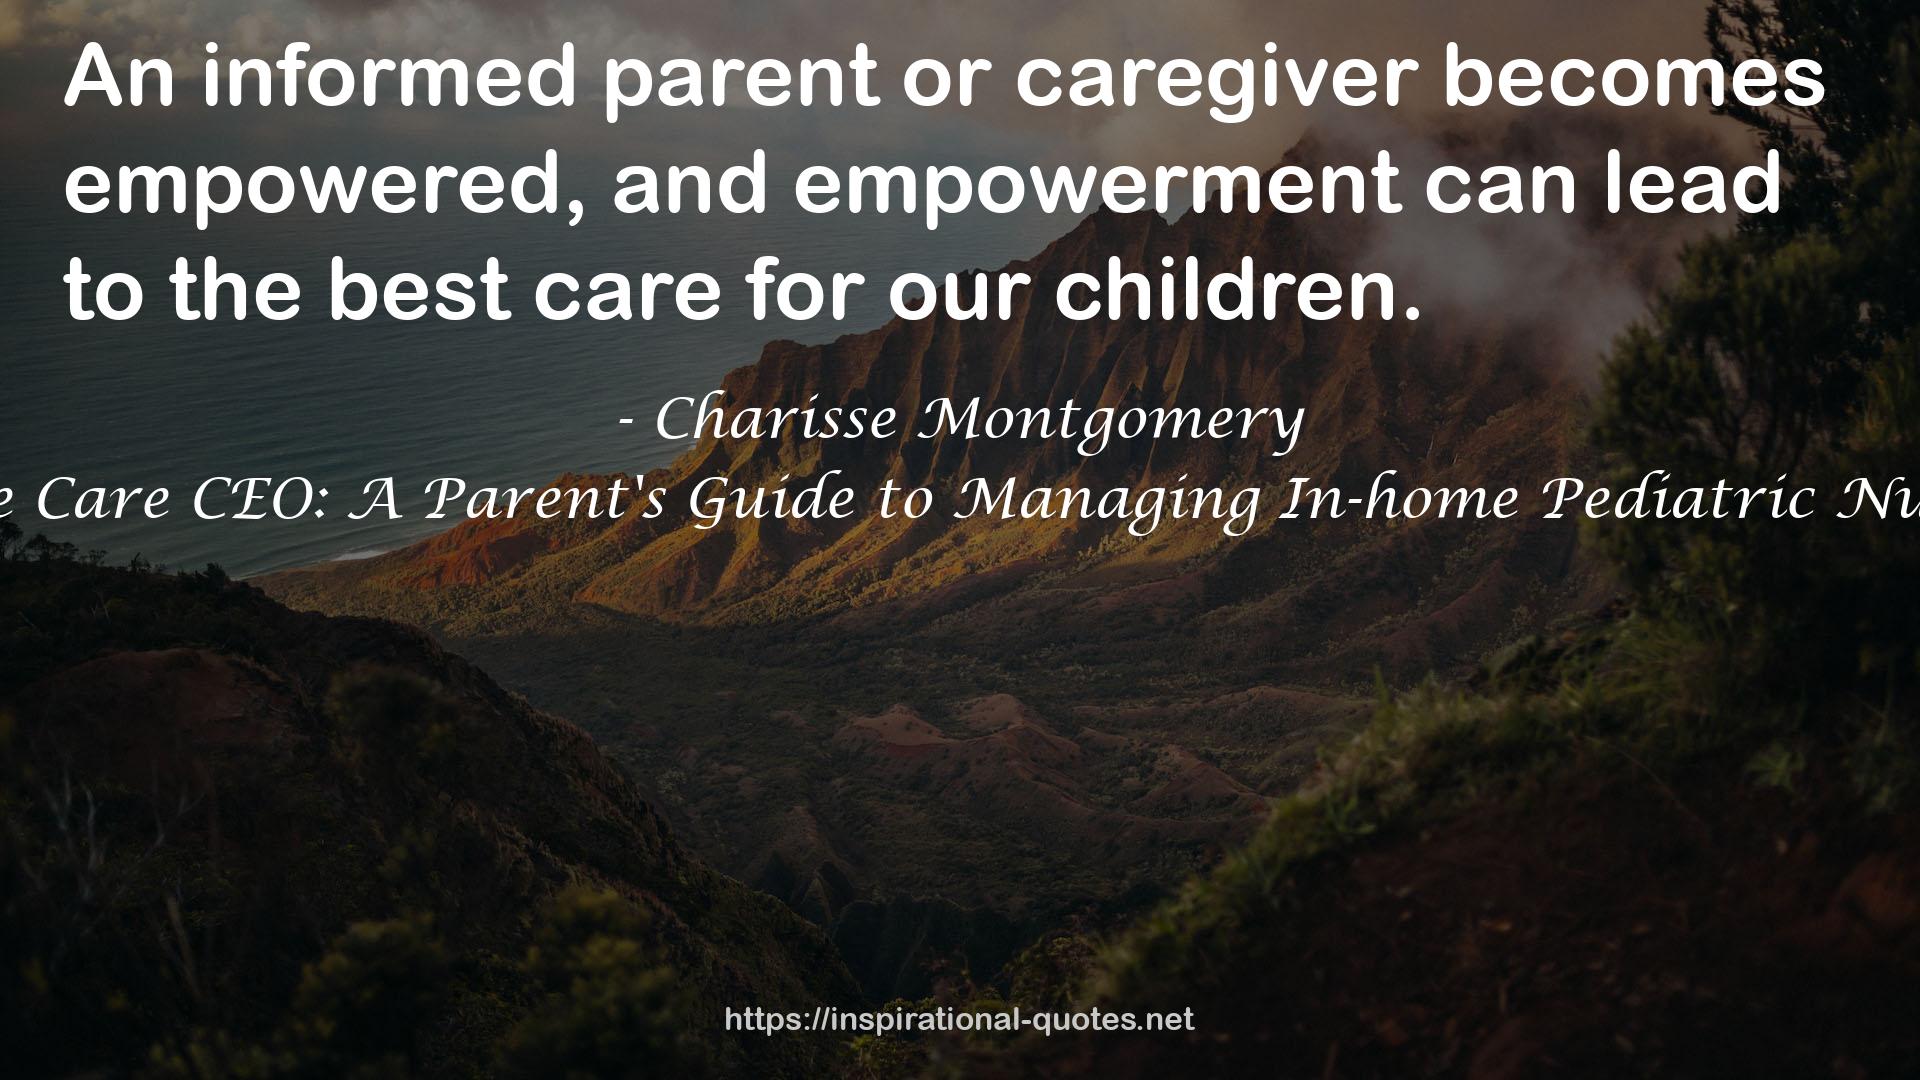 Home Care CEO: A Parent's Guide to Managing In-home Pediatric Nursing QUOTES